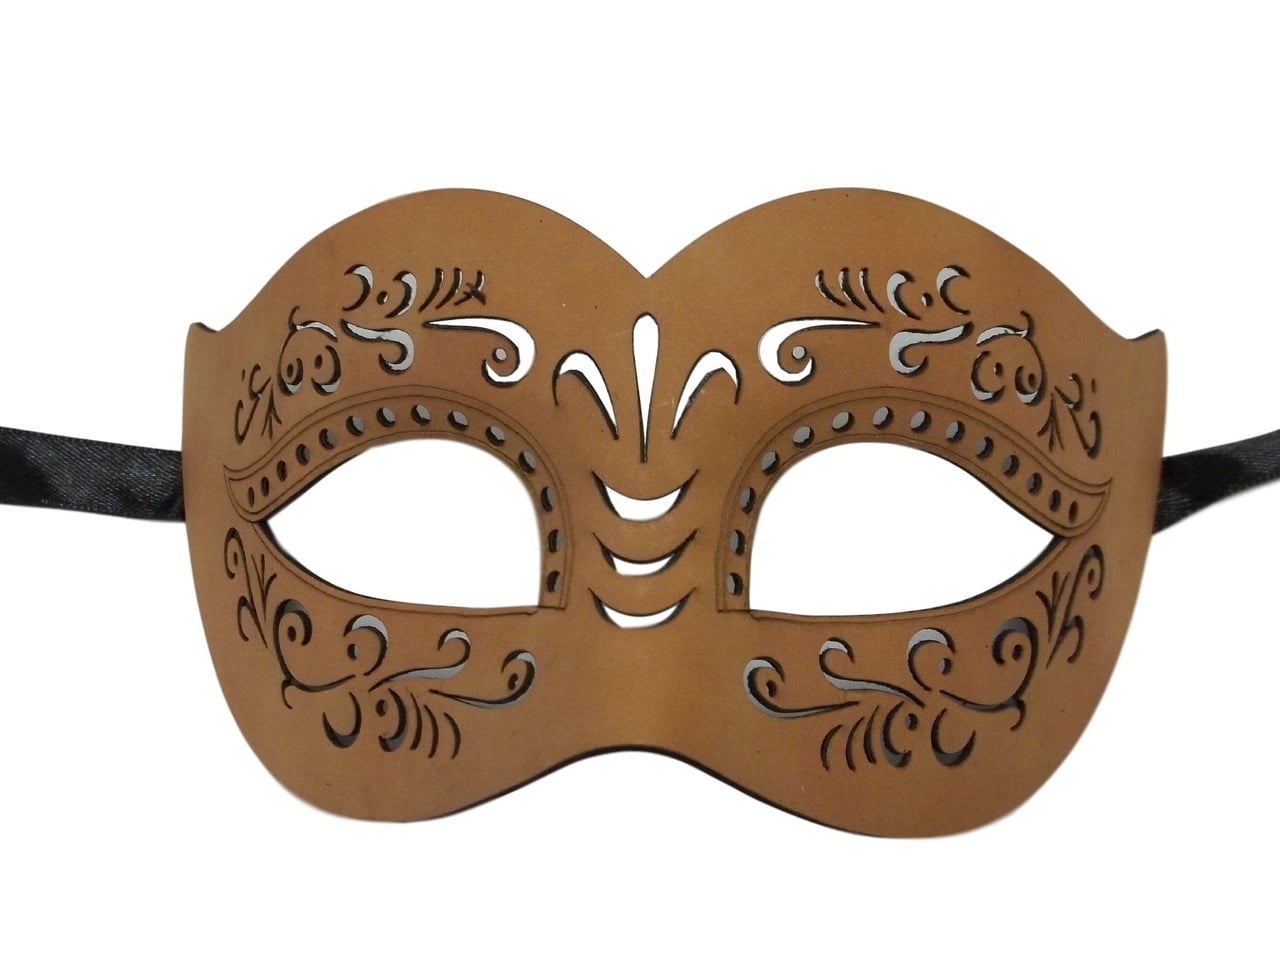 Blank Mardi Gras Paper Masks for Decorating, Masquerade Party (6 Designs,  12 Pack)